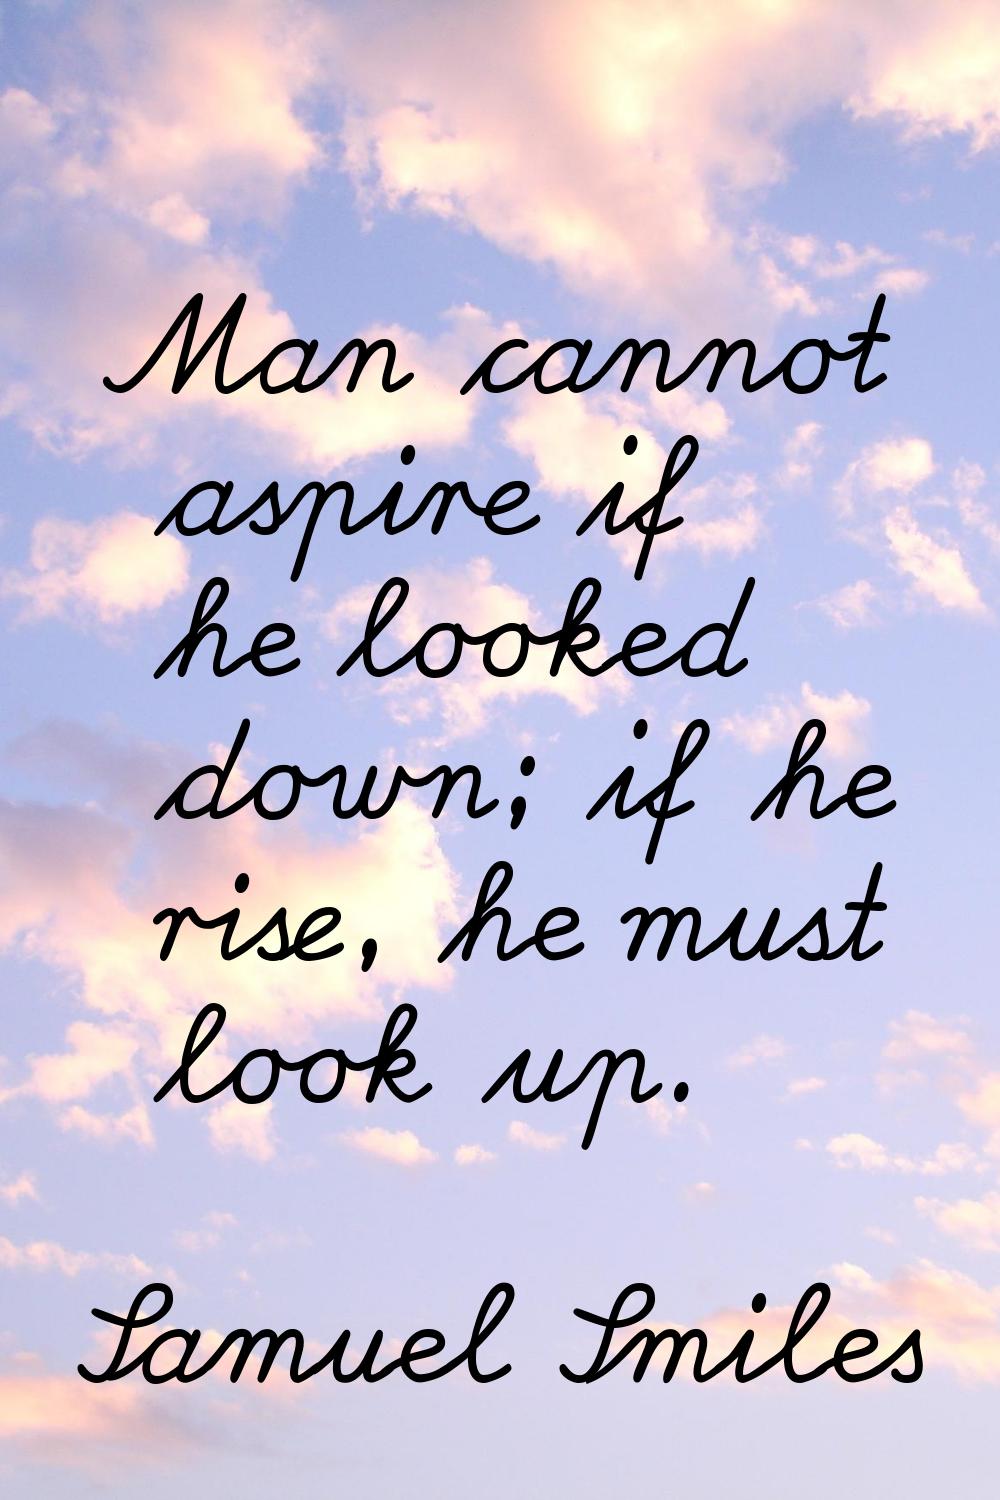 Man cannot aspire if he looked down; if he rise, he must look up.